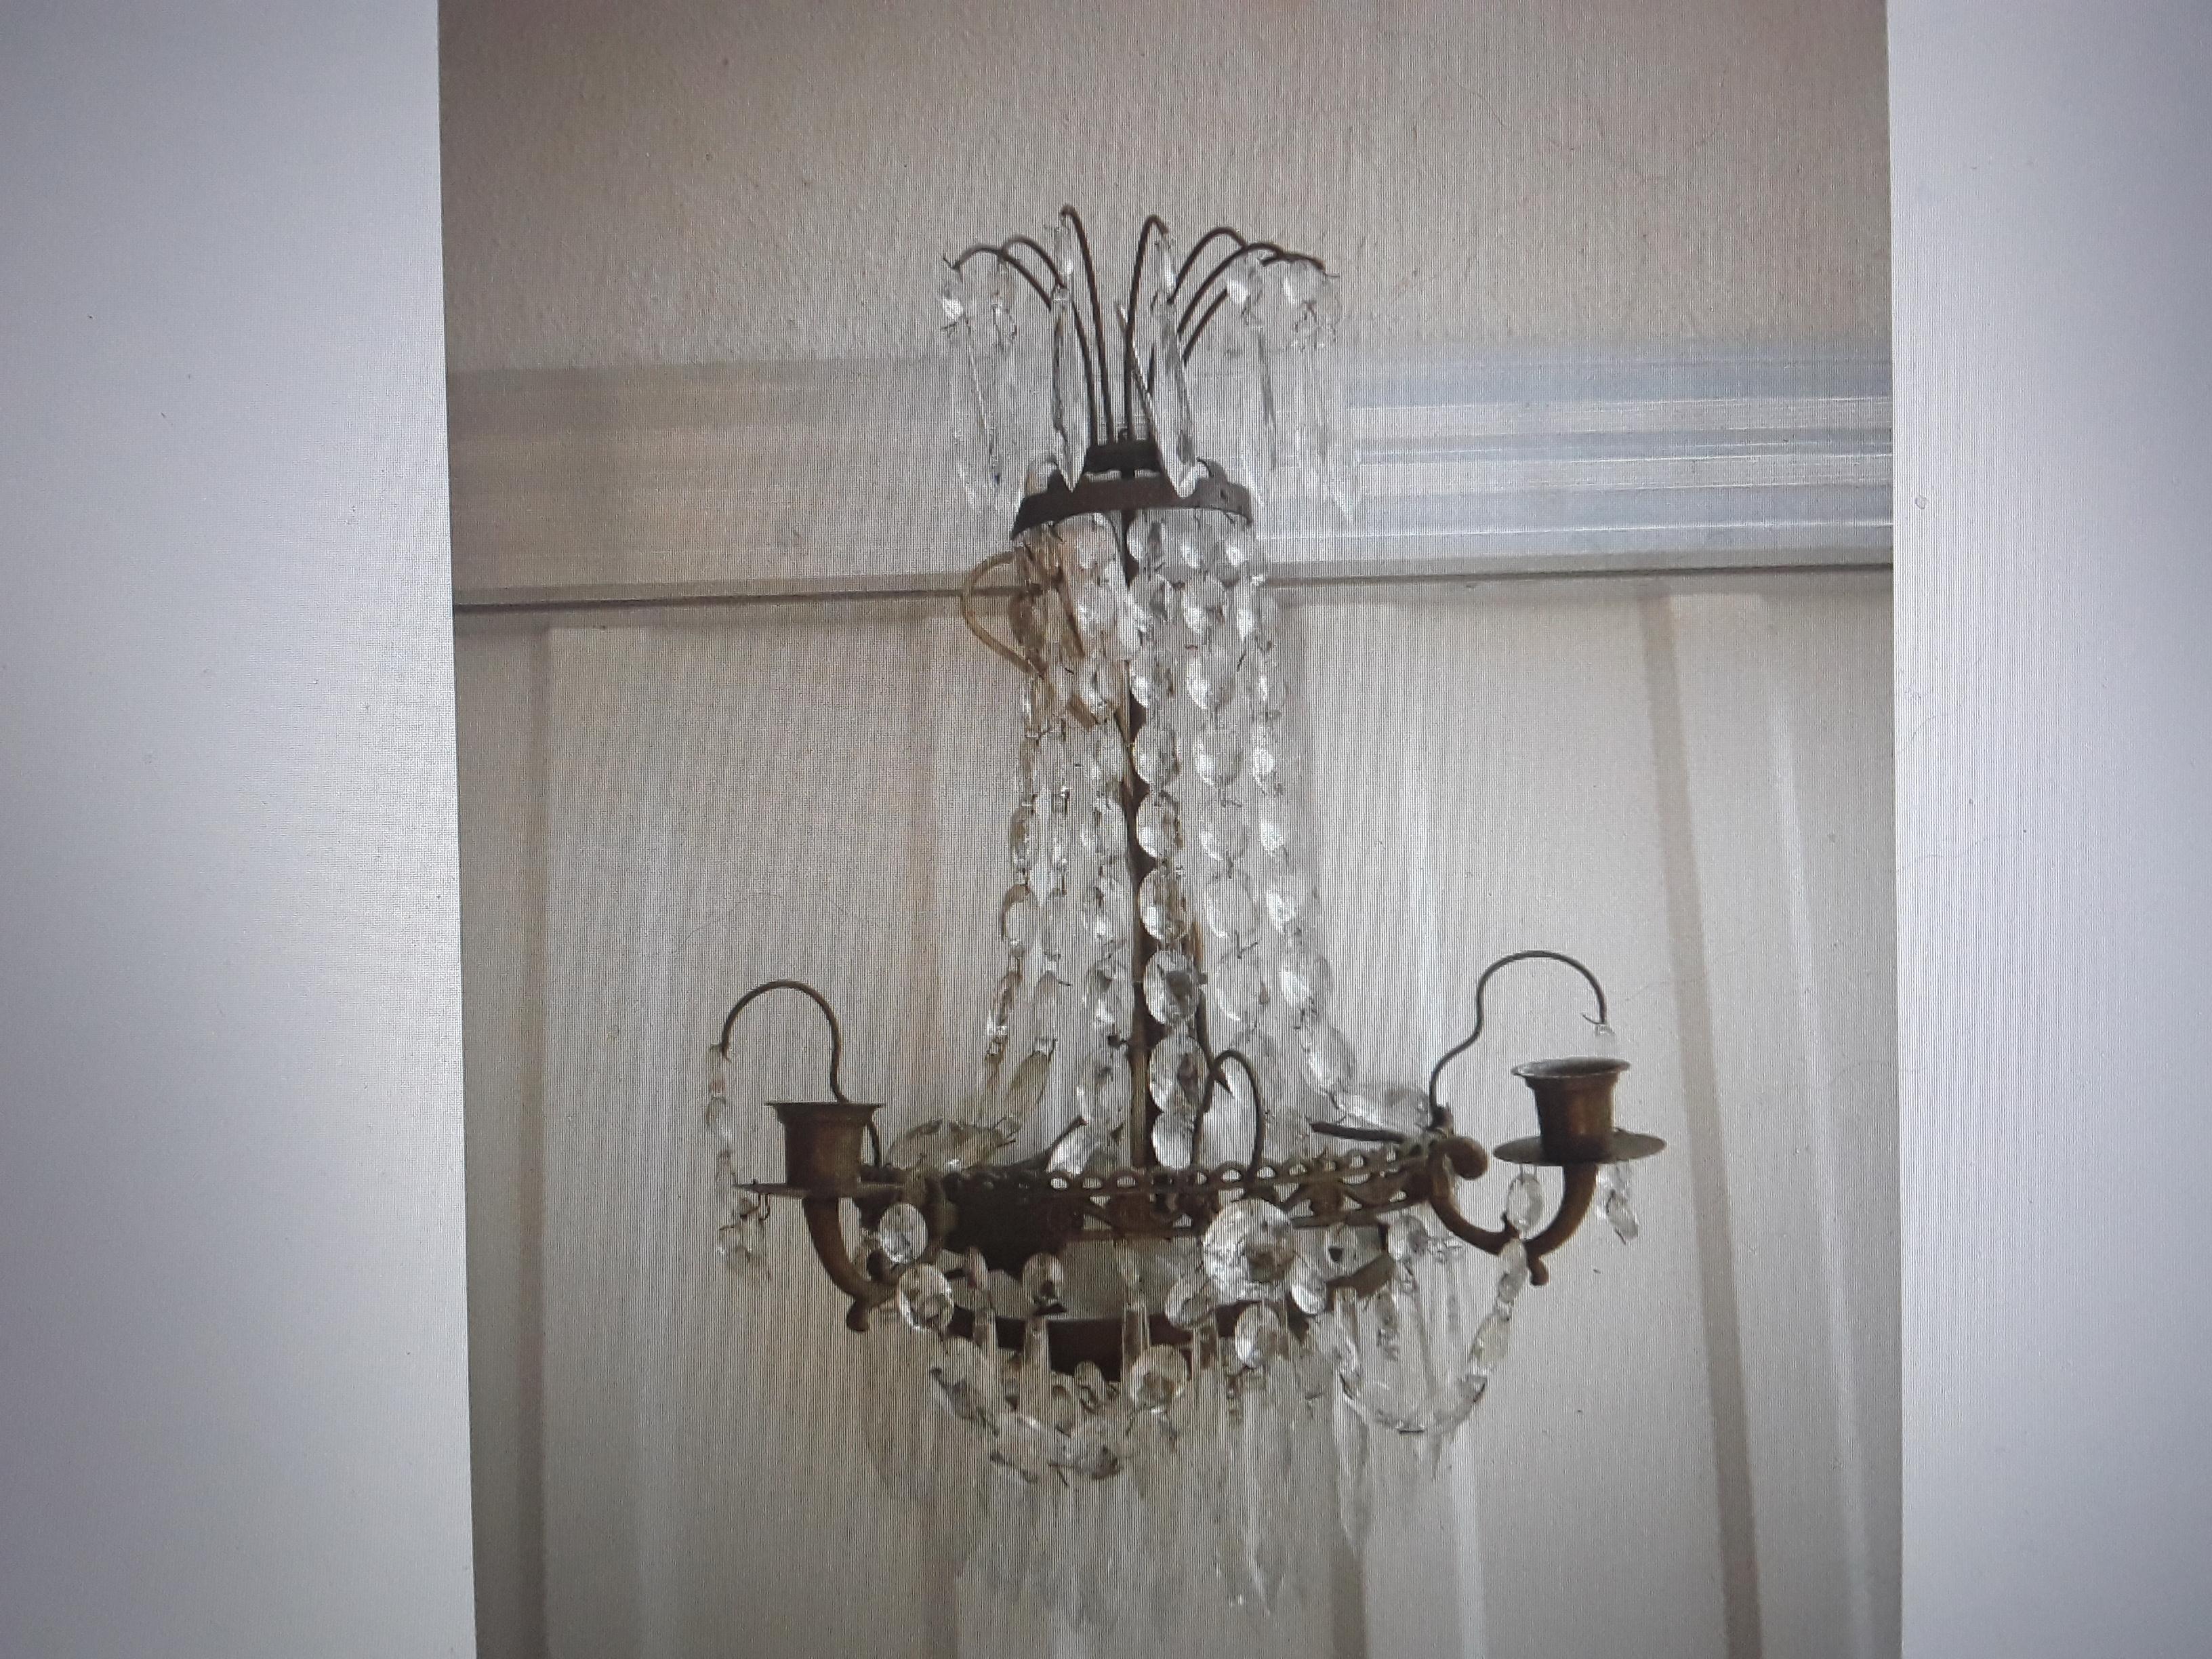 19thc Gustavian Bronze Cut Crystal Cascading Waterfall Form Wall Sconce. This sconce is in its original unelectrified state.